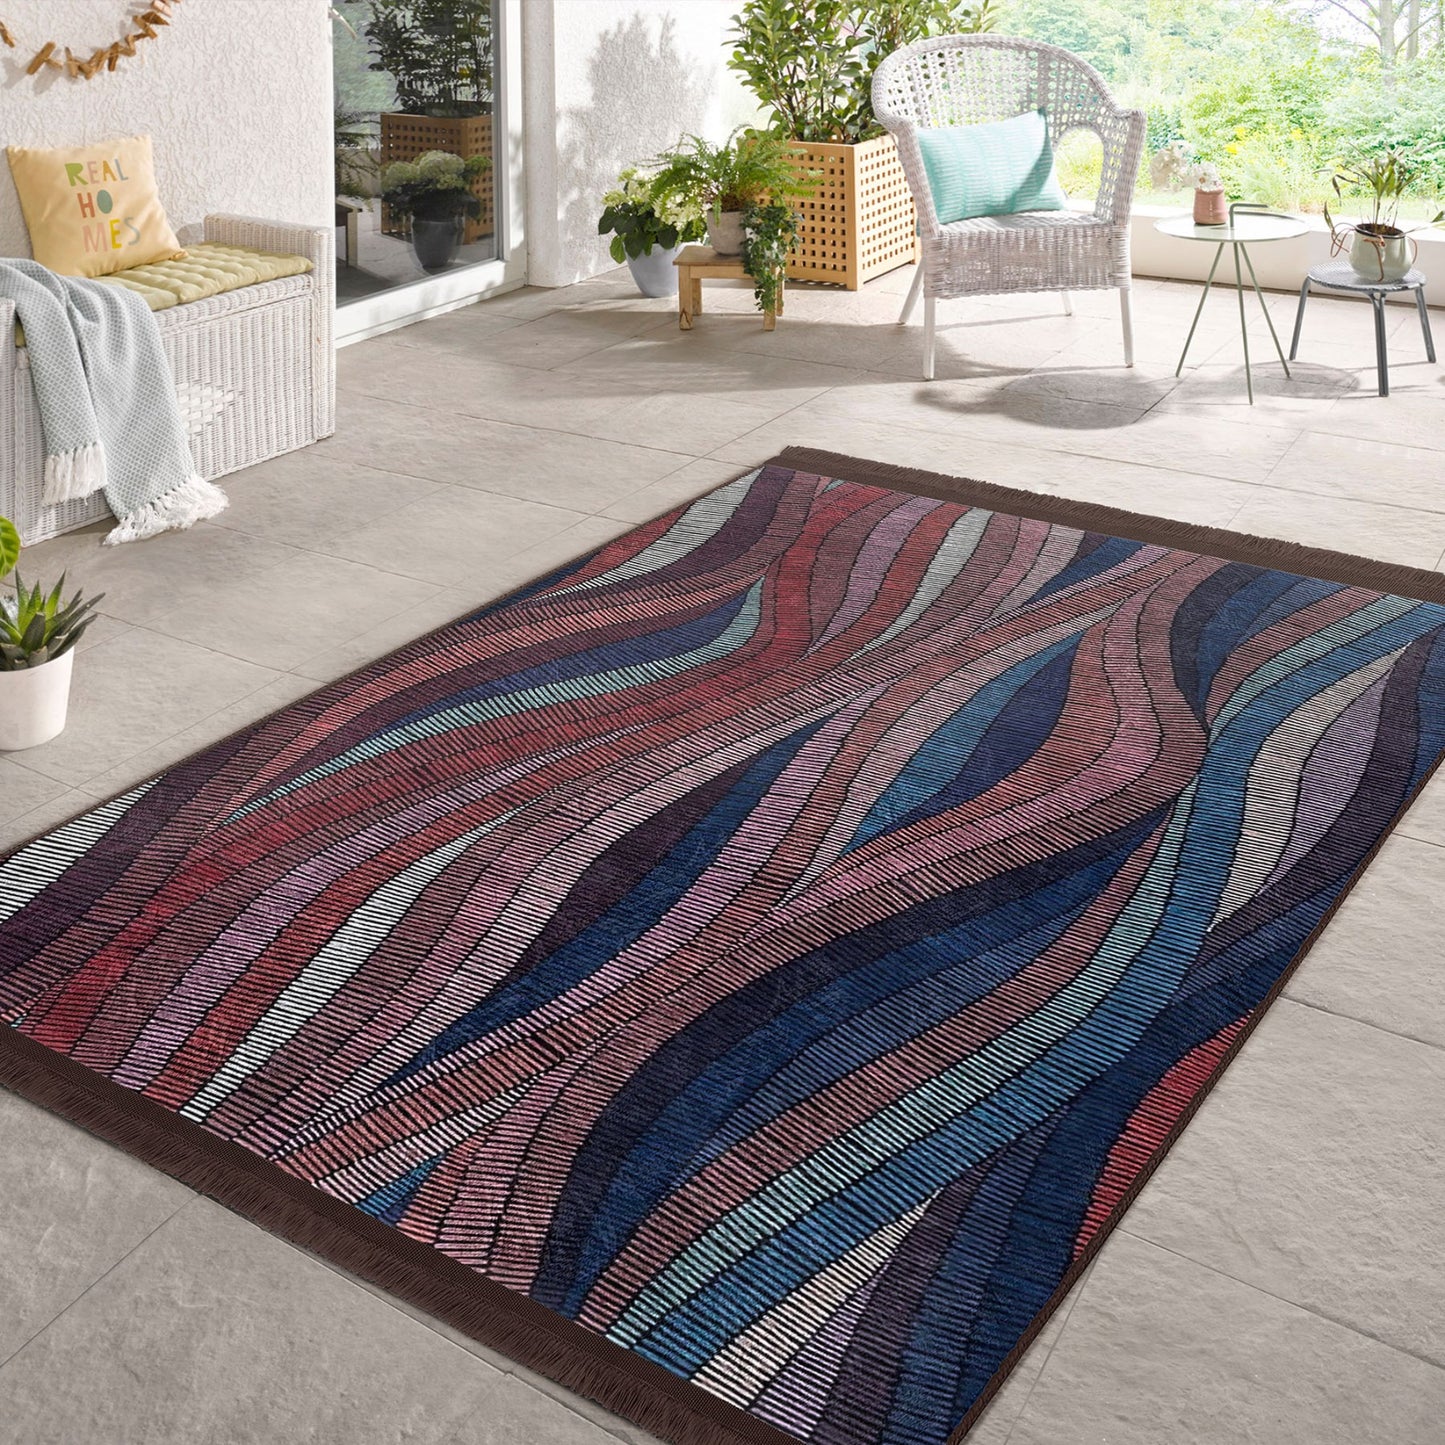 Wave Patterned Area Rug for a Stylish and Relaxing Interior